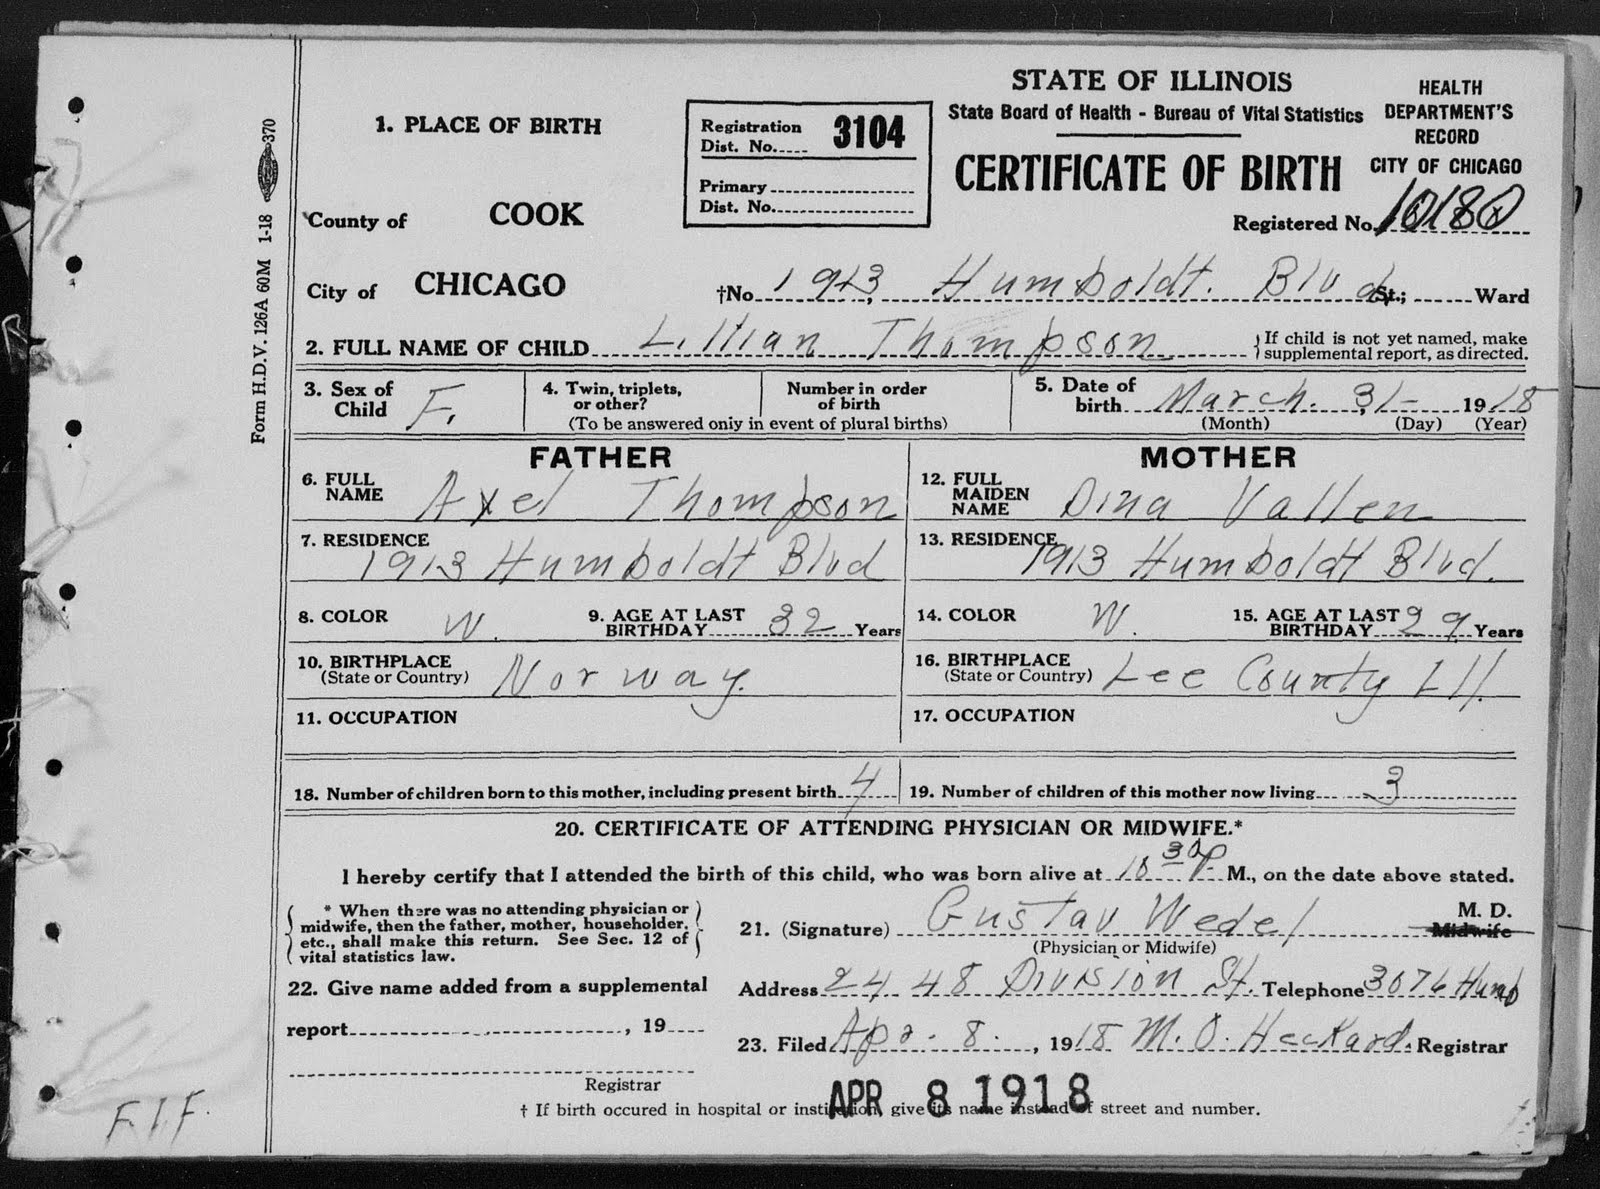 Obtaining A Birth Certificate In Cook County Illinois